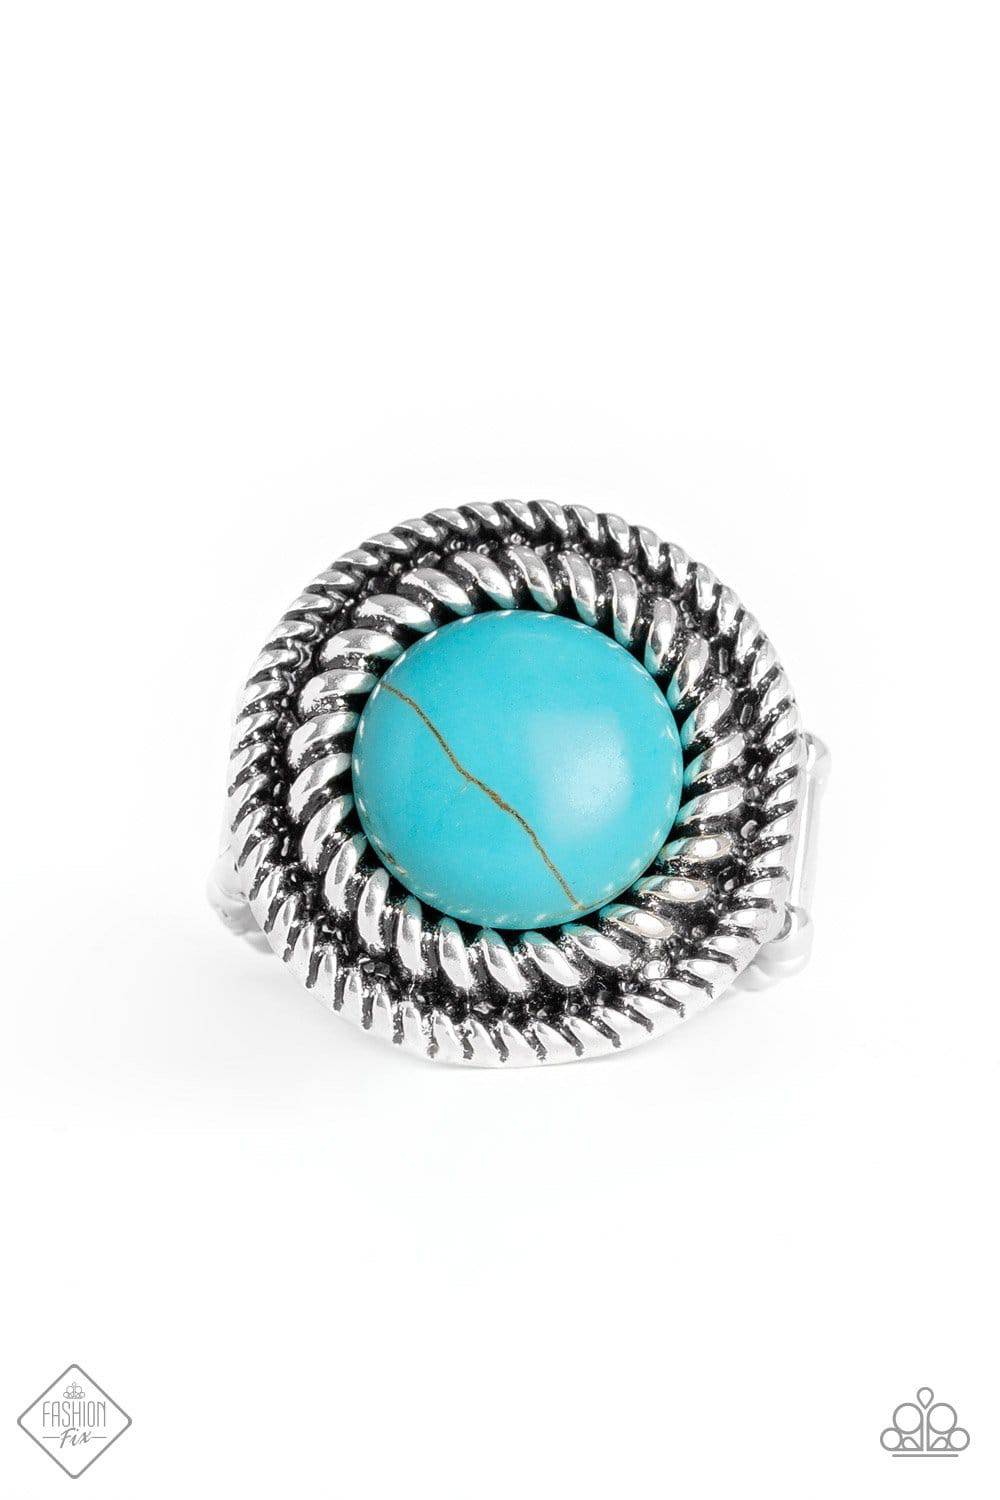 C133 - Rare Minerals Ring by Paparazzi Accessories on Fancy5Fashion.com